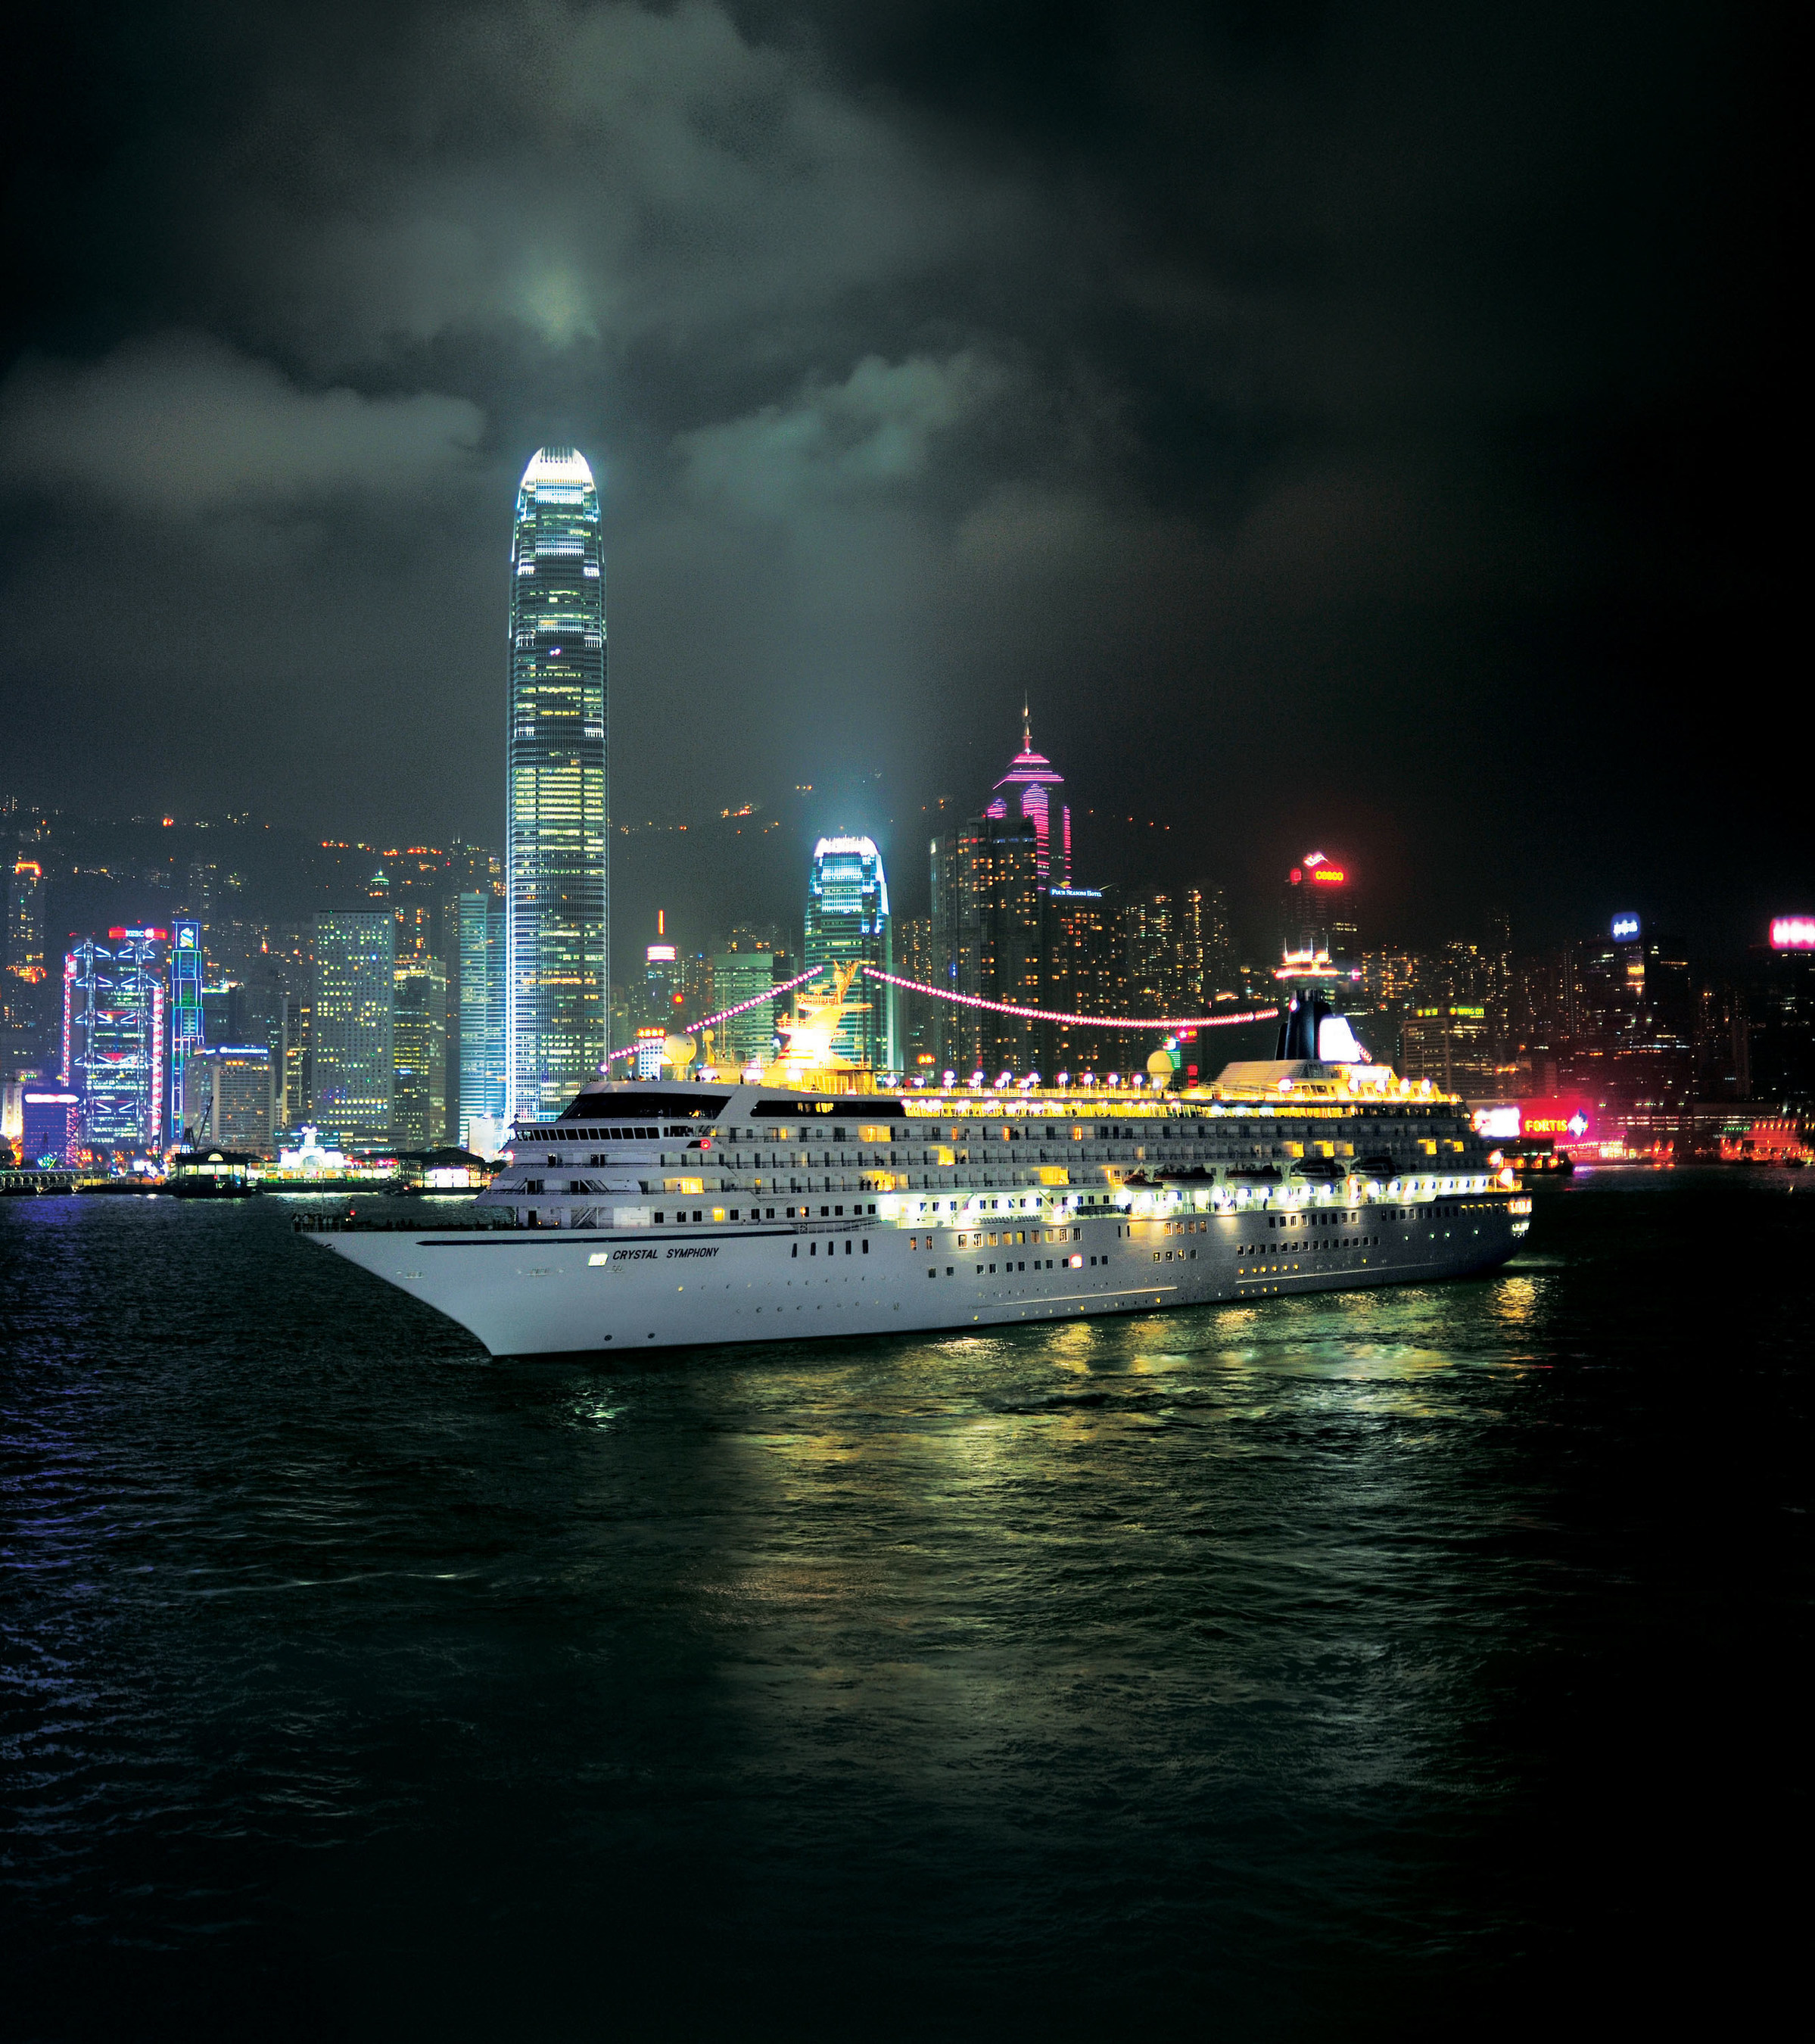 Sailing round-trip from Singapore starting December 21, the itinerary rings in the New Year with Crystal Symphony berthed at Ocean Terminal in Hong Kong's Victoria Harbour.  The prime positioning allows for a comfortably luxurious "front row" view of the fireworks countdown celebration, specially-illuminated skyscrapers, musical pyrotechnics, and the Symphony of Lights.